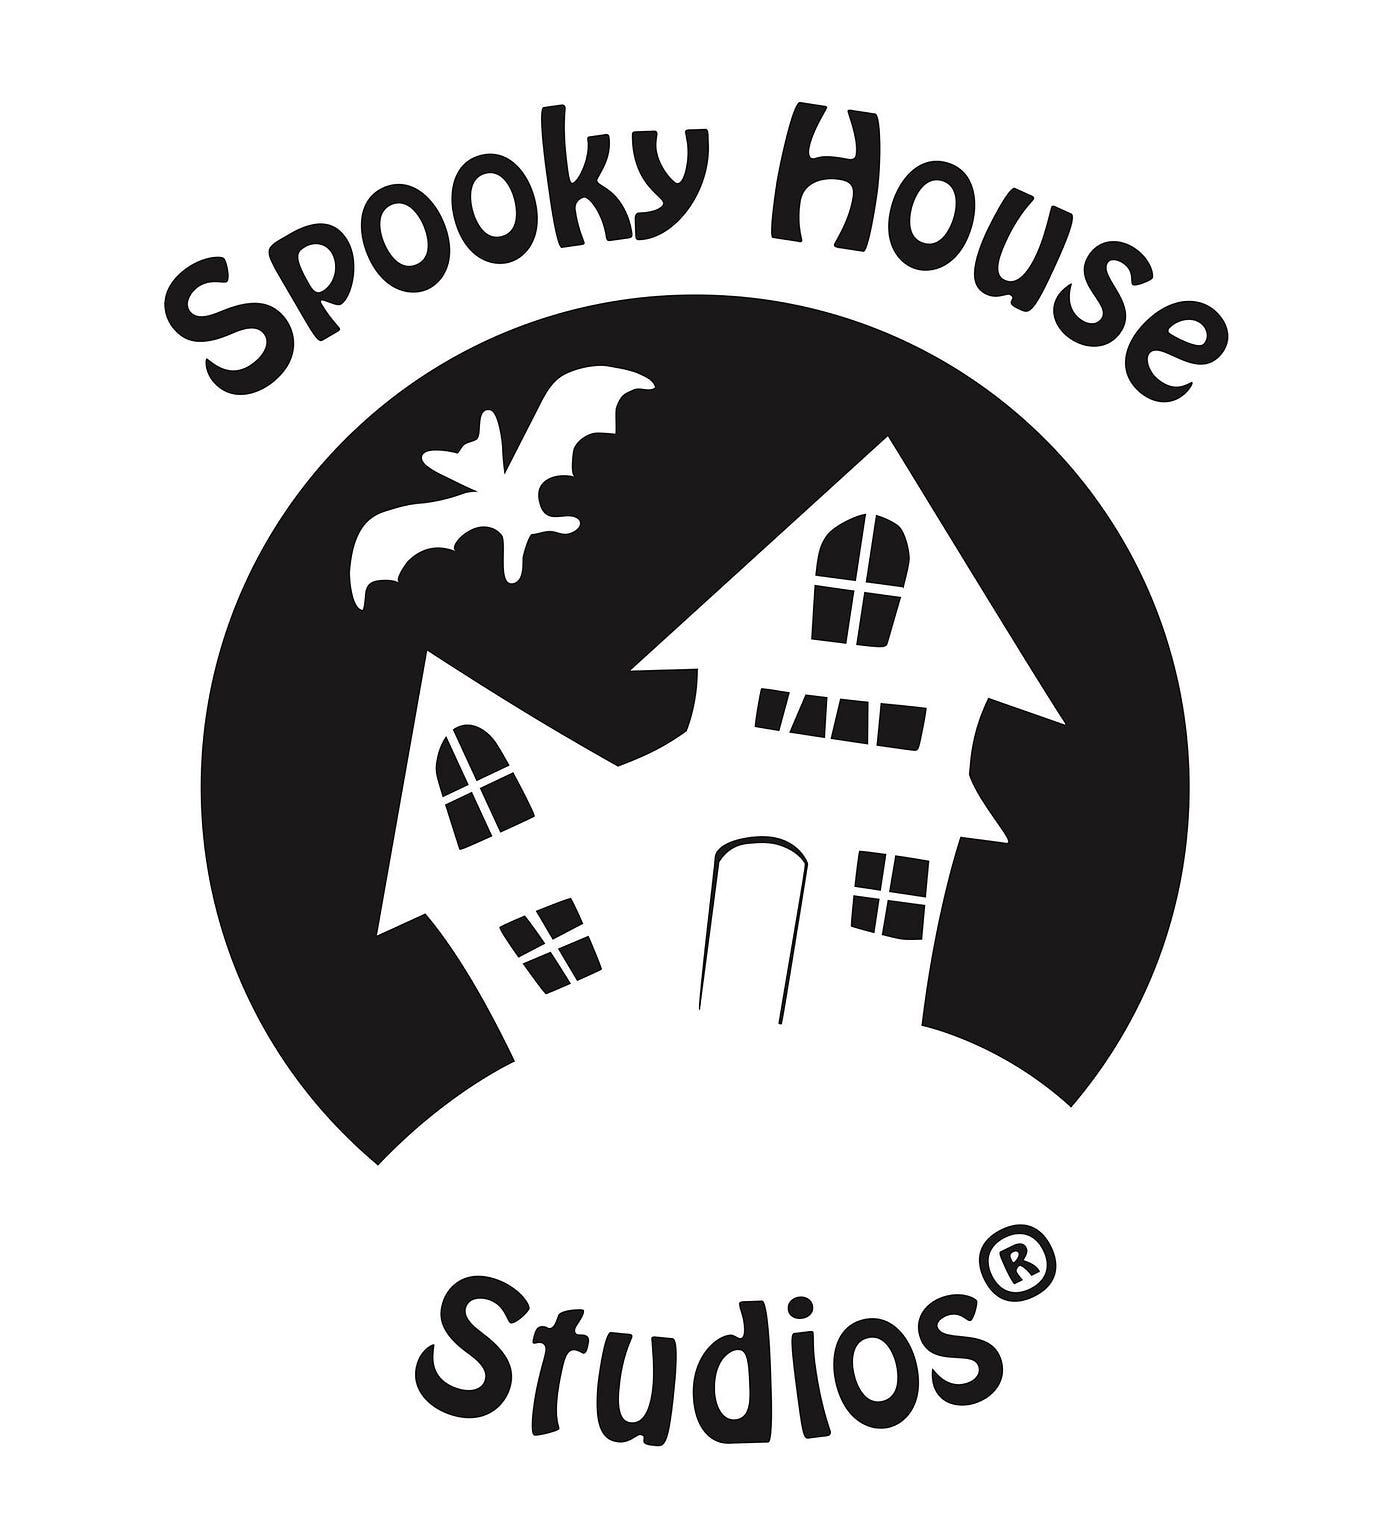 Looking for tips on how to make this house spookier - Building Support -  Developer Forum